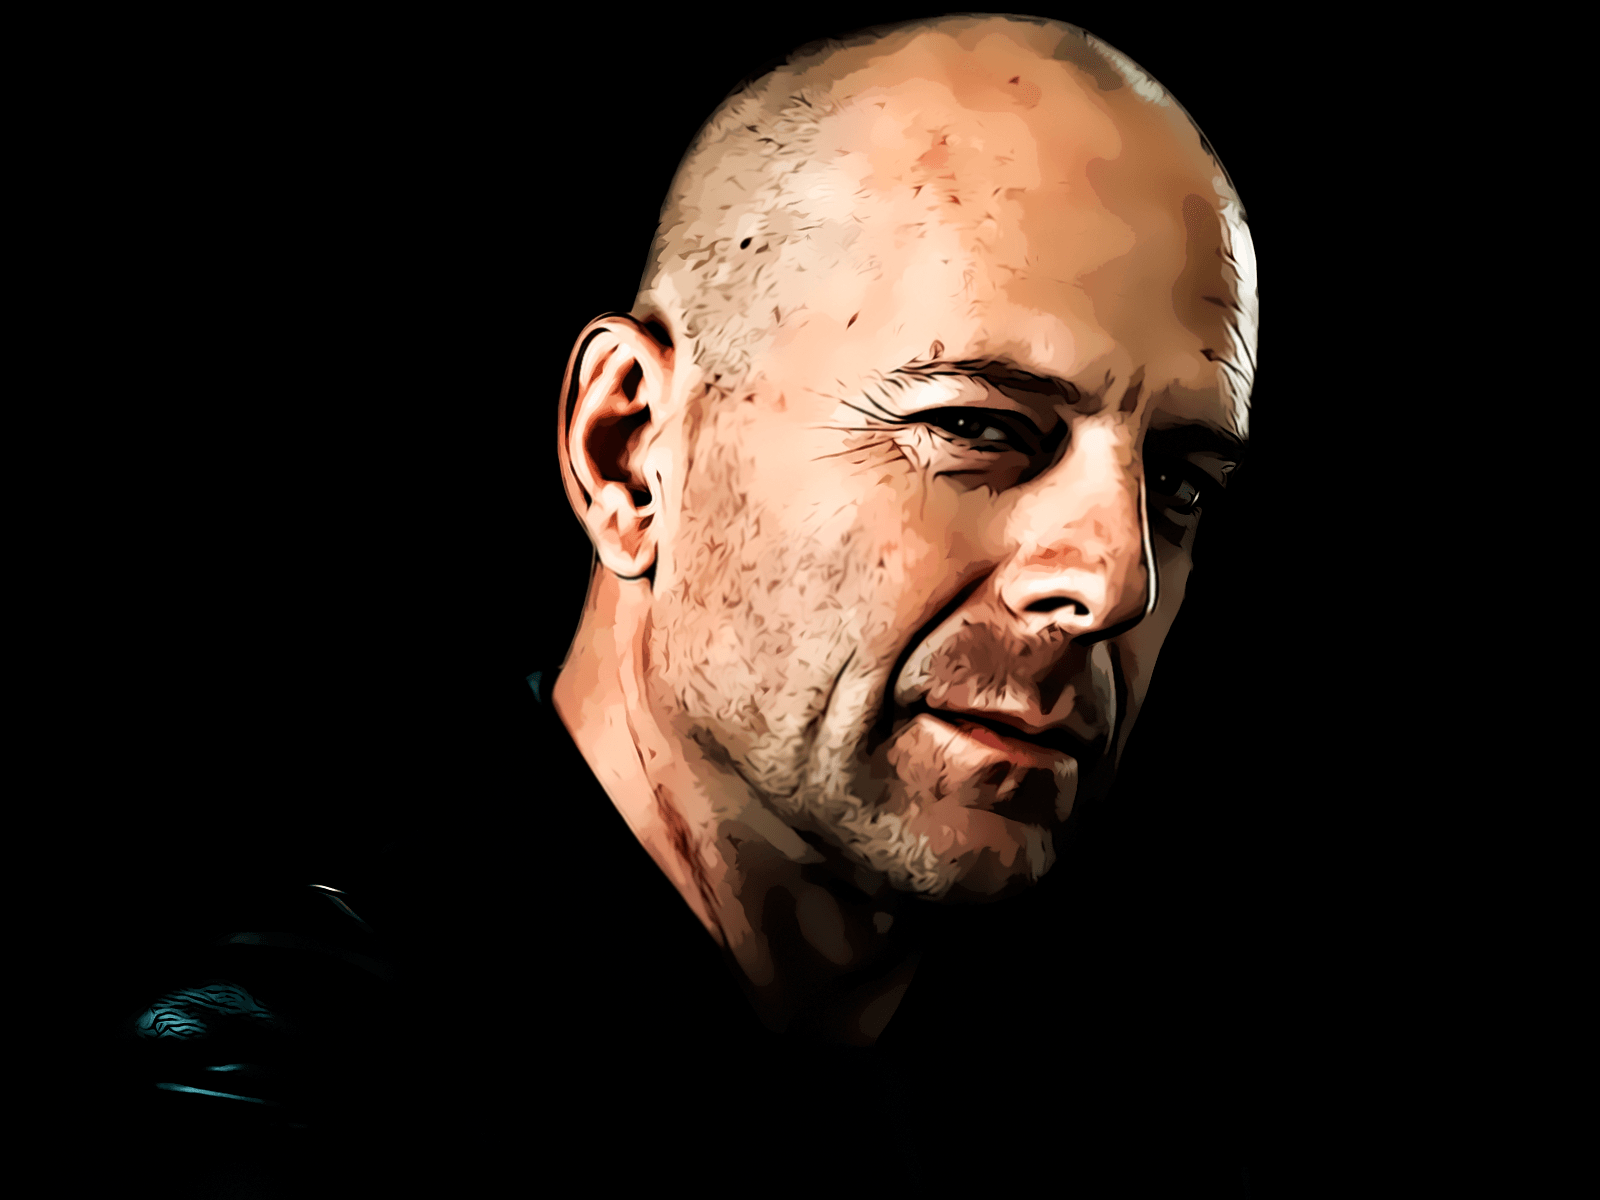 Bruce Willis Wallpapers and Background Images   stmednet 1600x1200